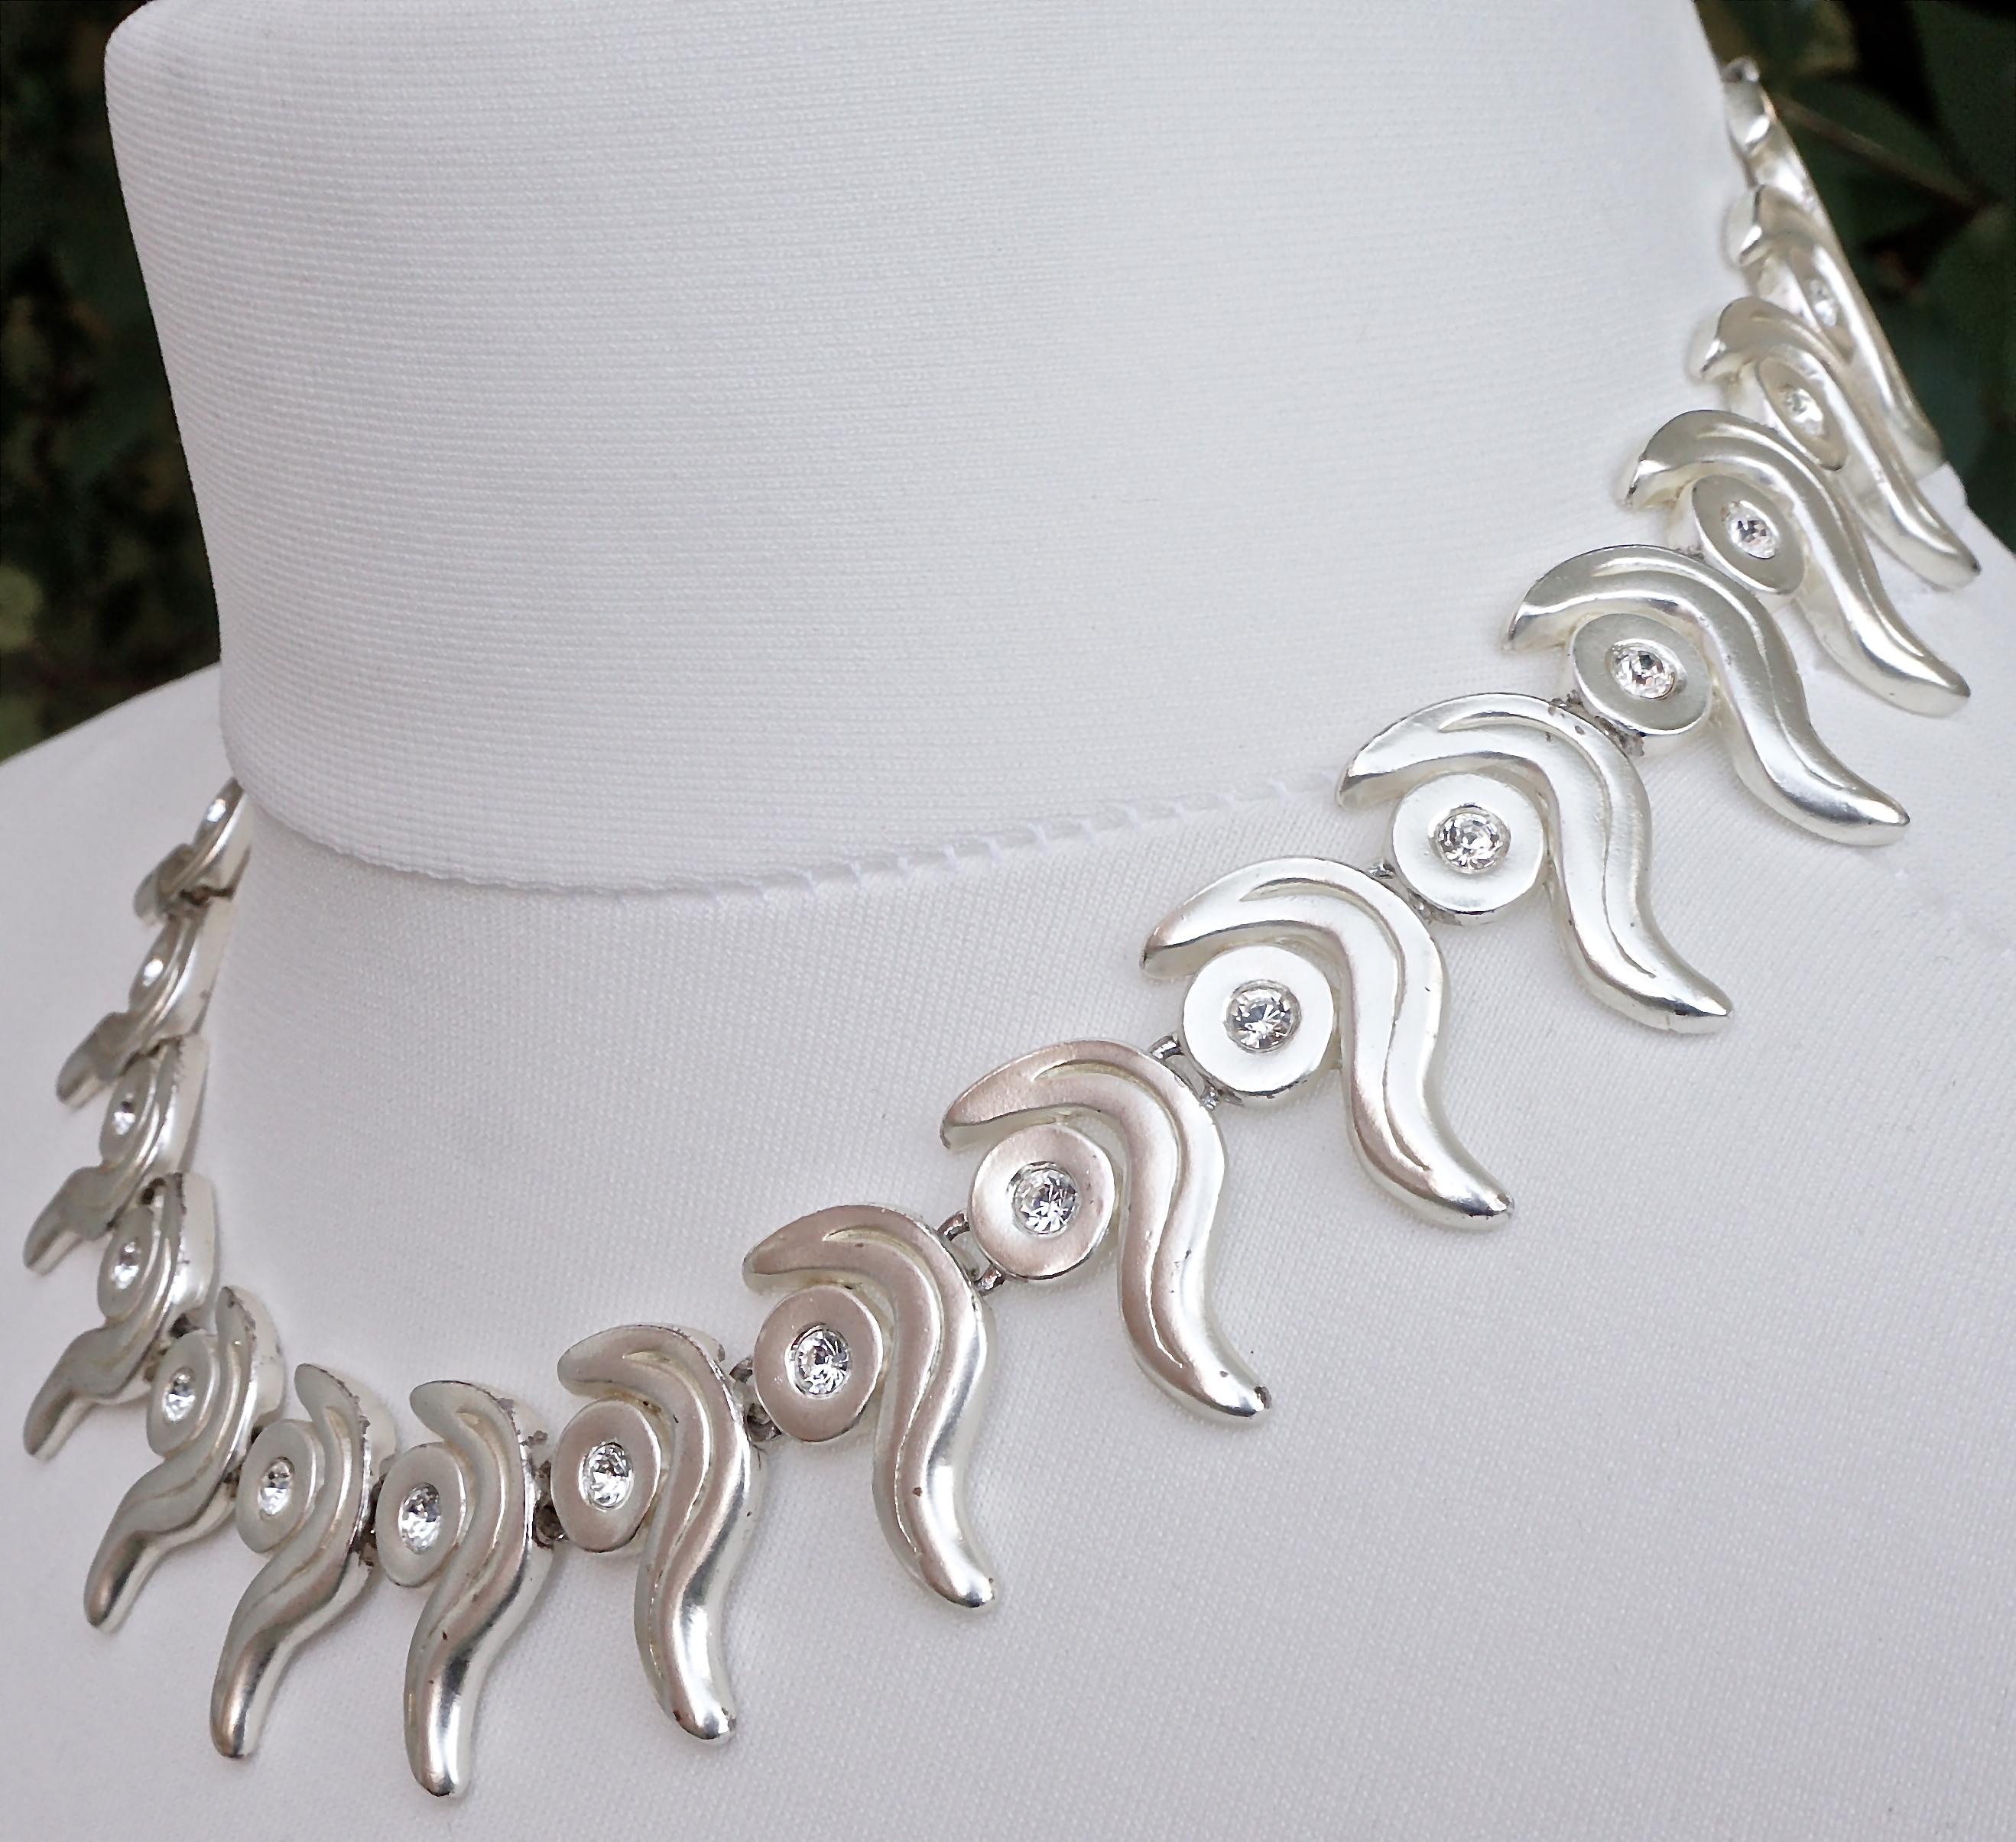 Silver Tone Swirl Design and Clear Rhinestones Link Necklace and Clip Earrings For Sale 1